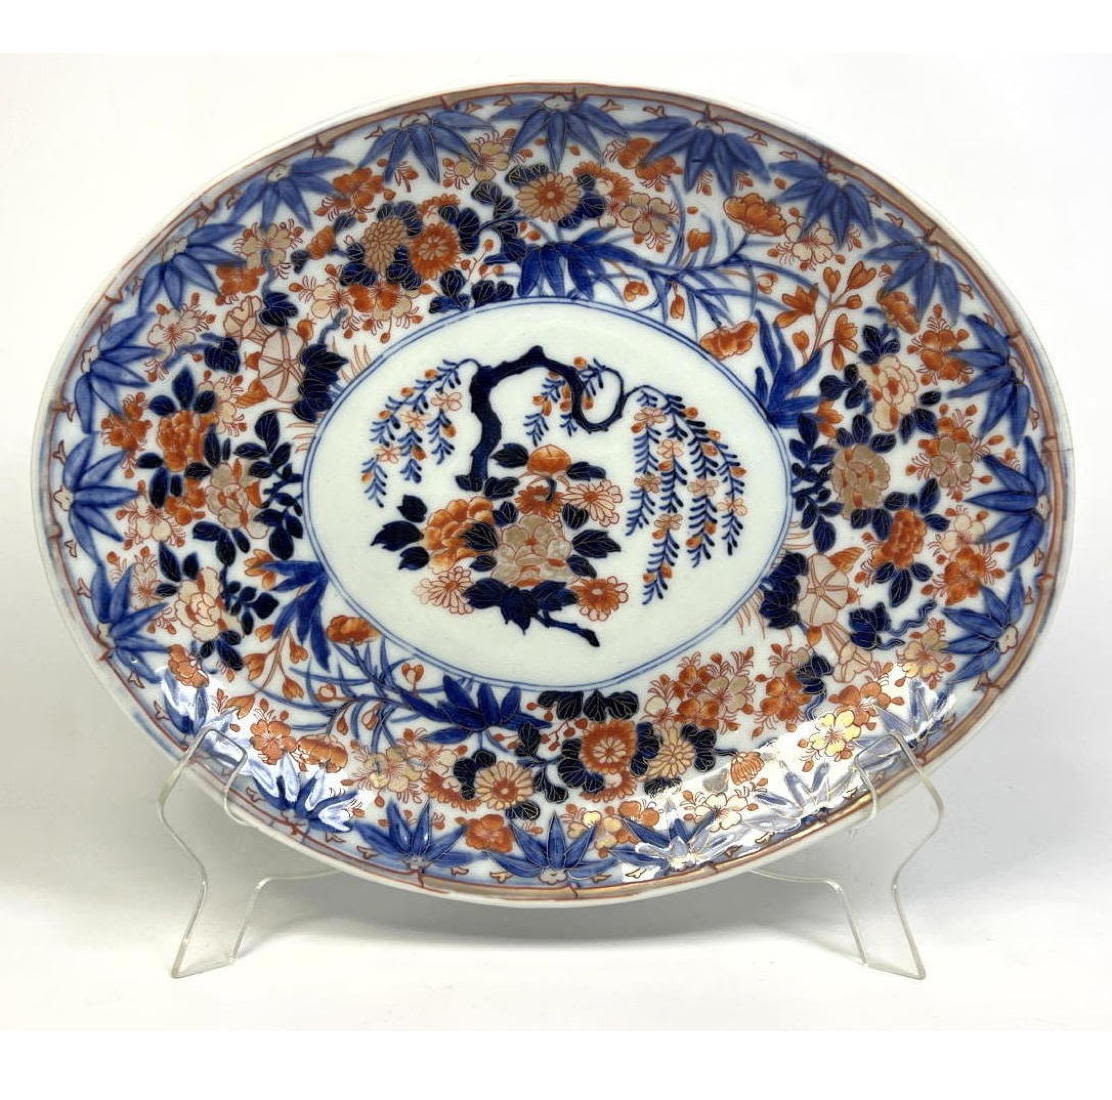 Chinese Imari Oval Platter Dimensions  2a6272